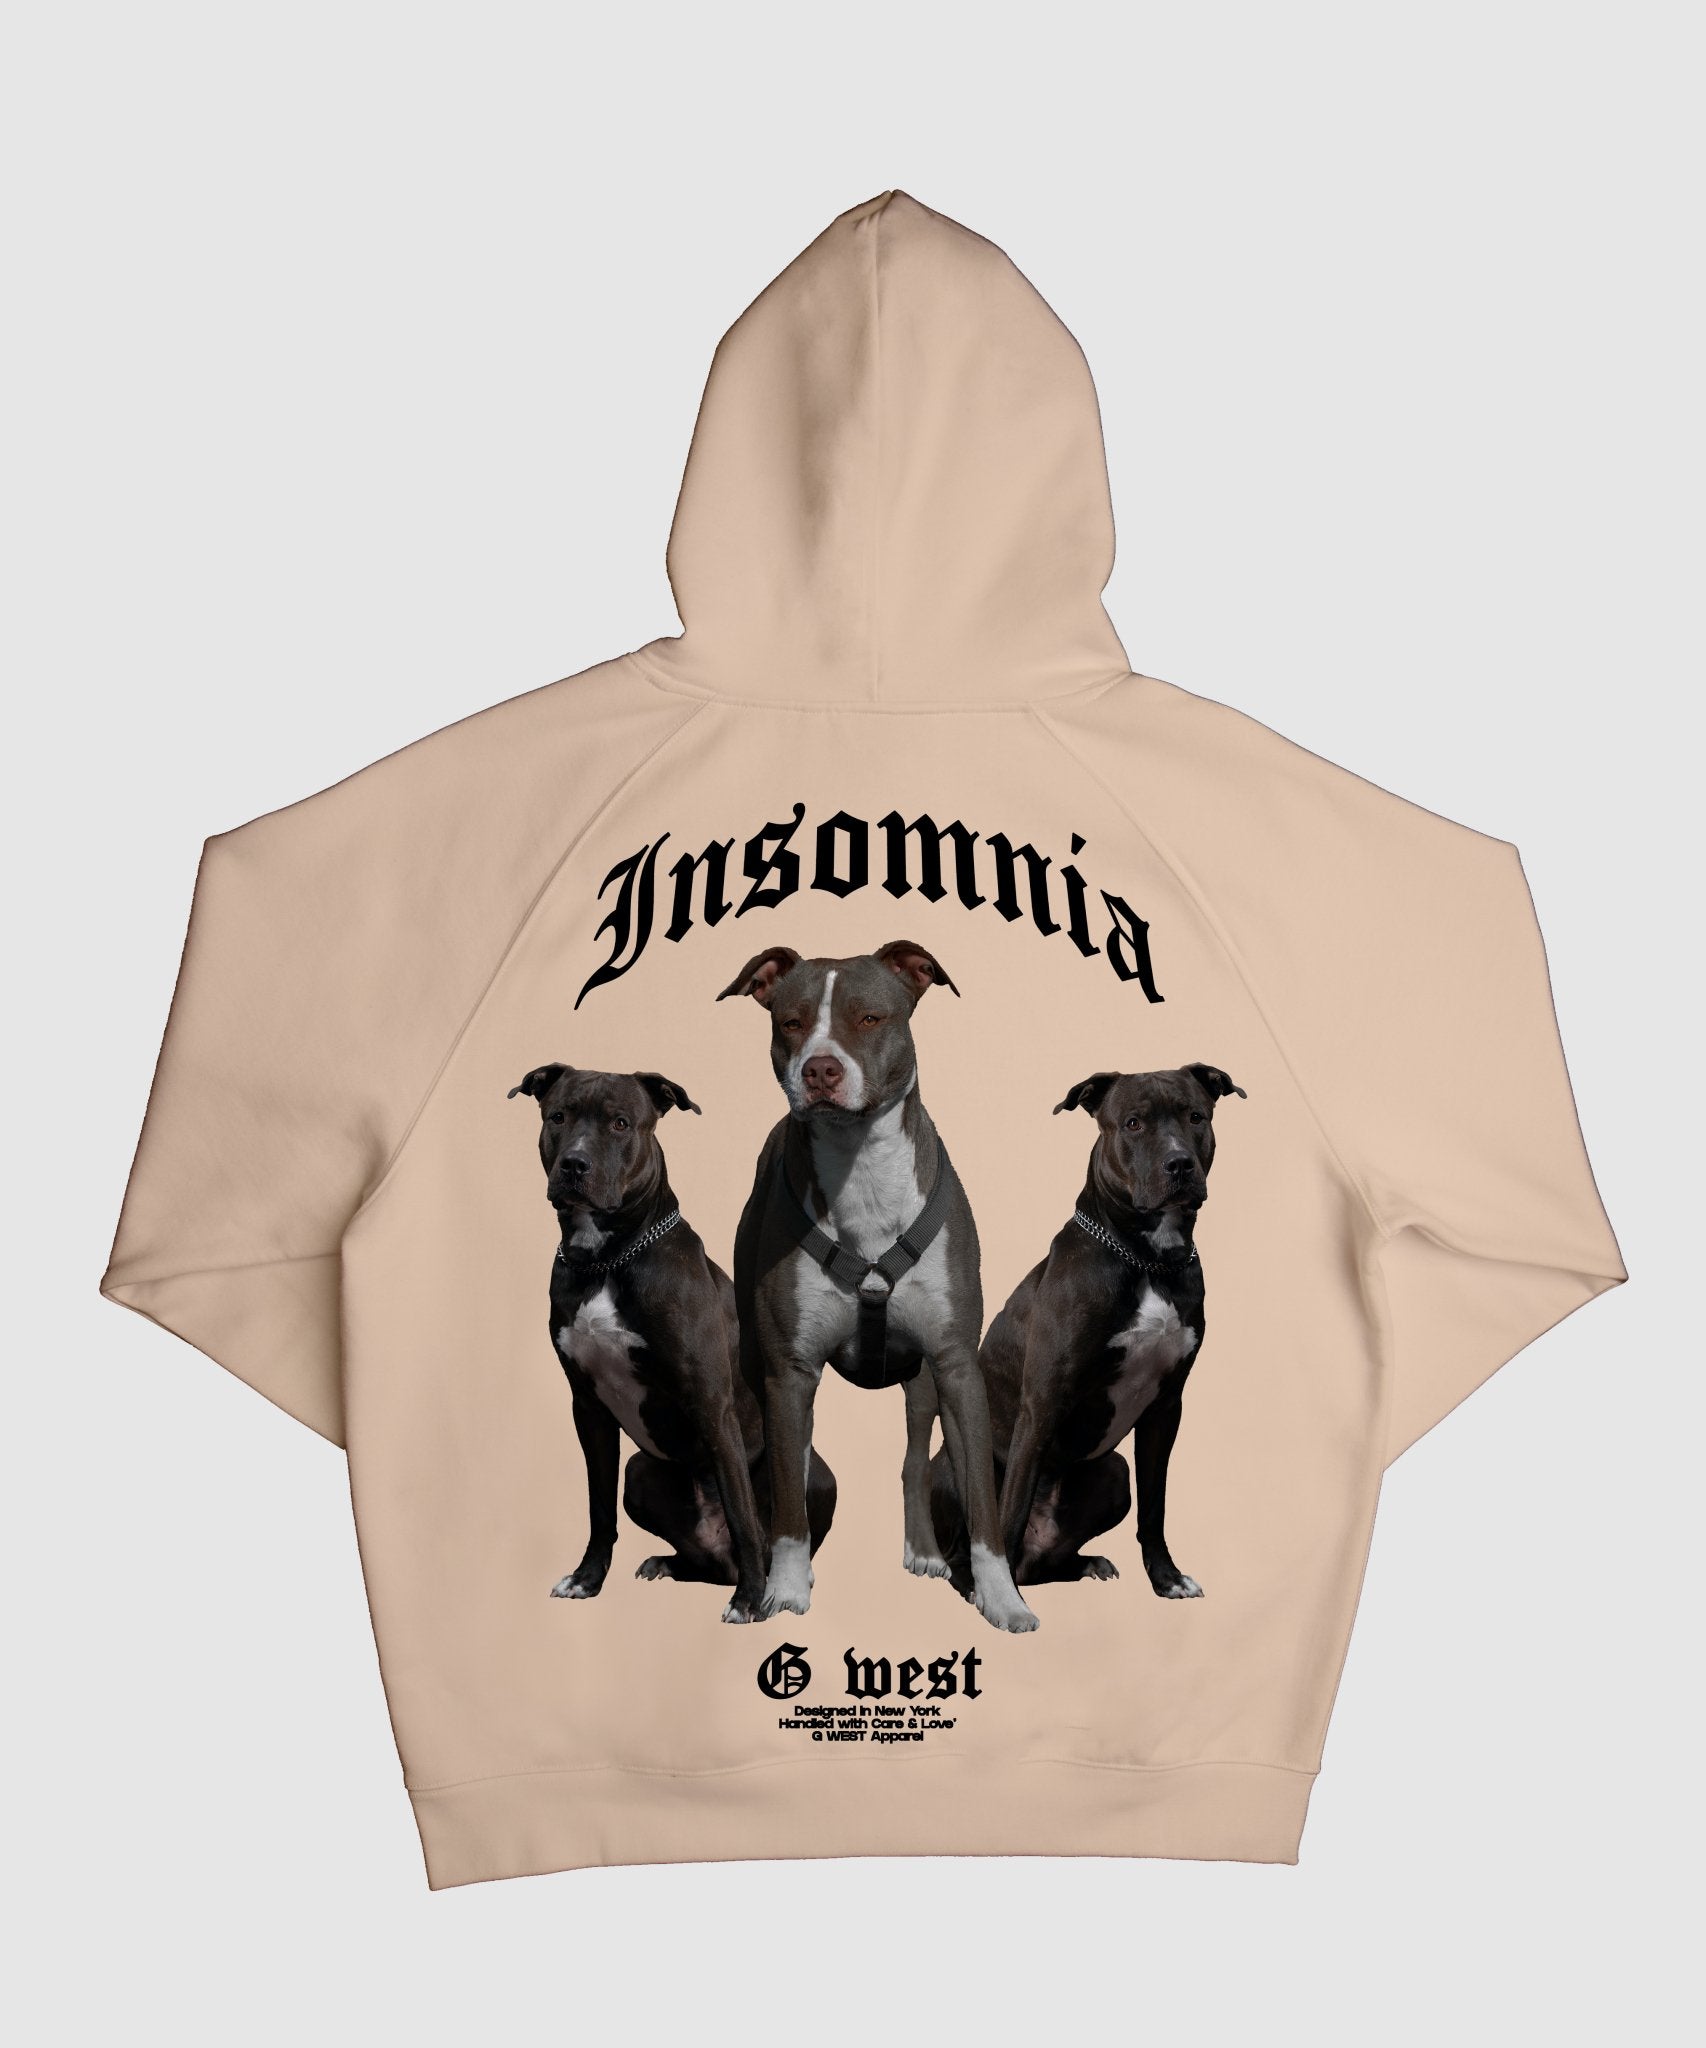 G WEST PITBULL HOODIE MENS STYLE - 2 COLORS - G West